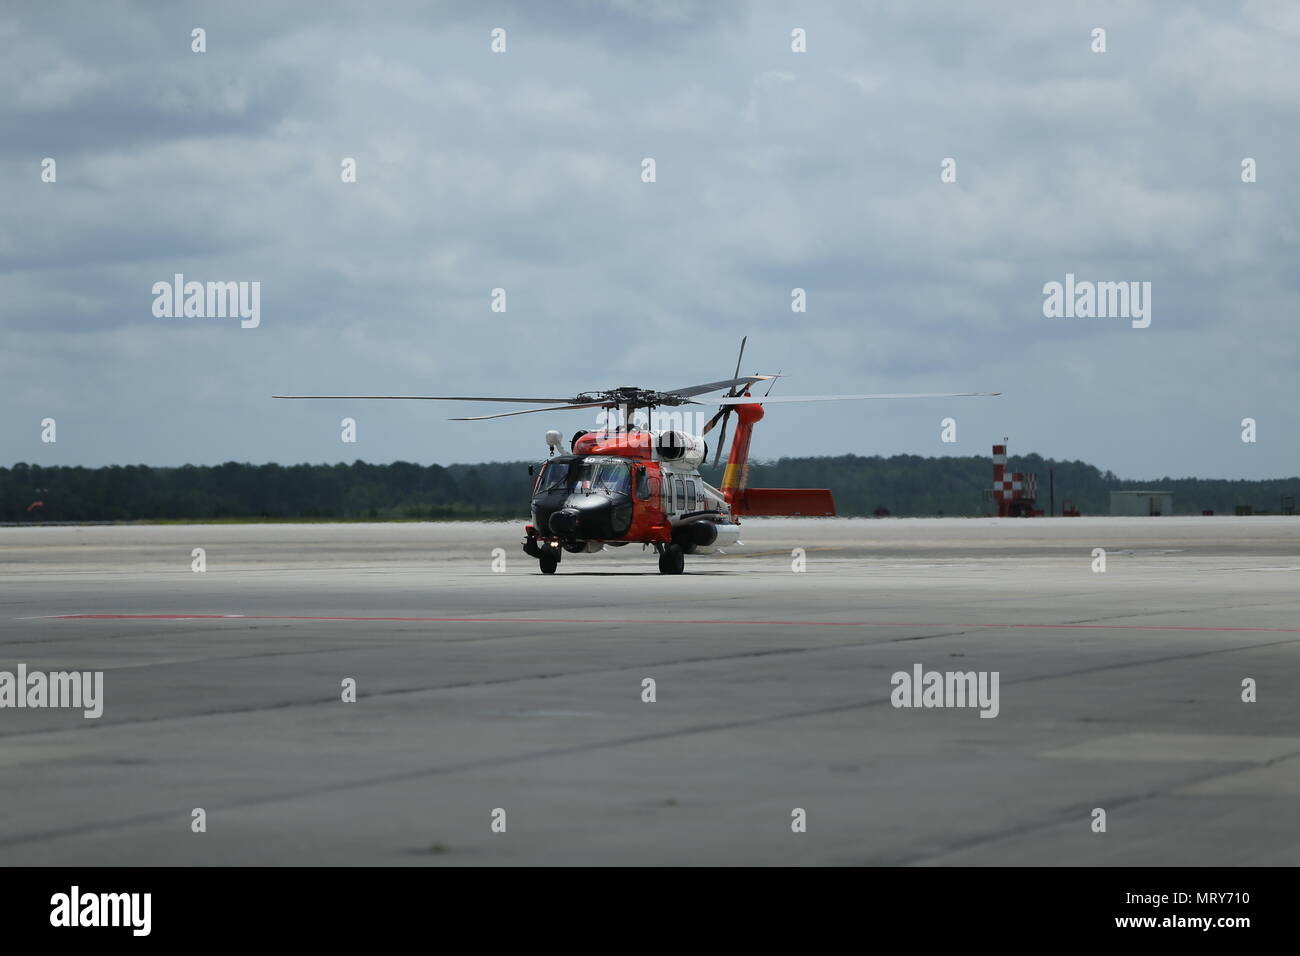 A U.S. Coast Guard MH-60T Jayhawk taxis down the flight line at Marine Corps Air Station Cherry Point, N.C. after the Fifth District Search and Rescue Exercise (SAREX) on July 11, 2017. SAREX was a joint exercise conducted to certify the U.S. Coast Guard's capability to rescue Marine Corps pilots in the event of a downed aircraft. (U.S. Marine Corps photo by Lance Cpl. Jailine L. Martinez) Stock Photo